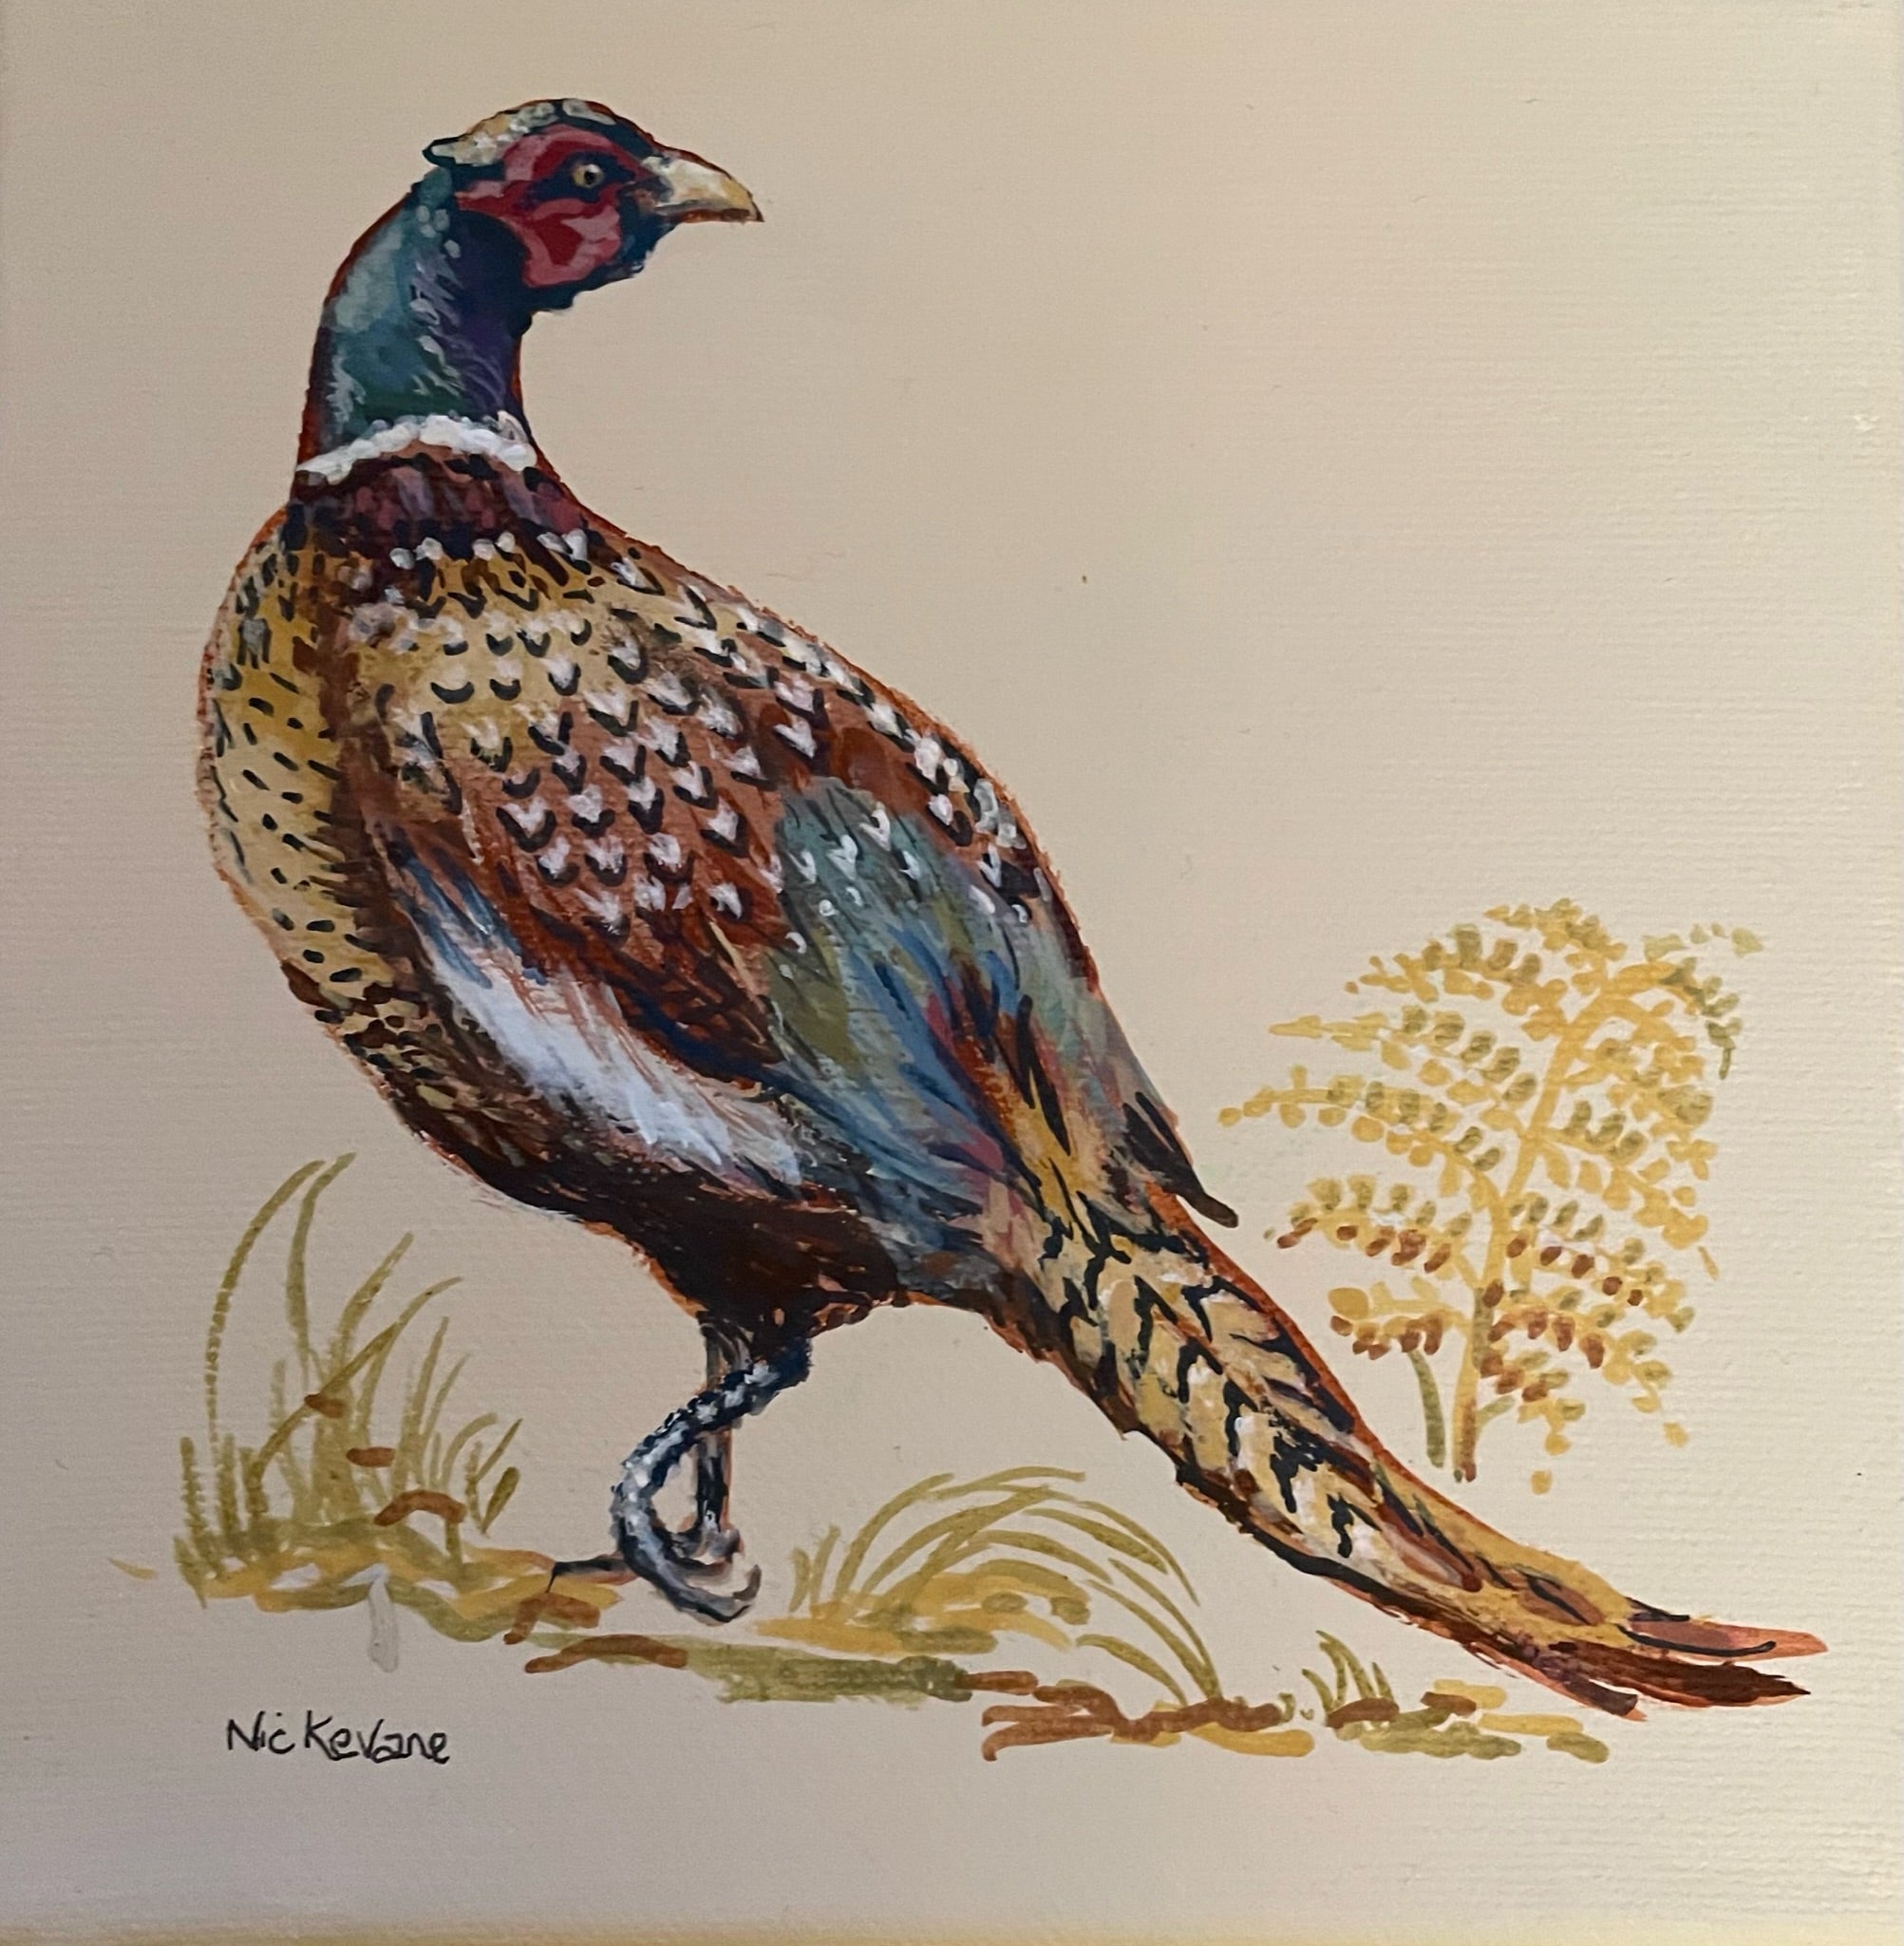 Pheasant I - 15cm x 15cm mini paintings depicting various countryside subjects.